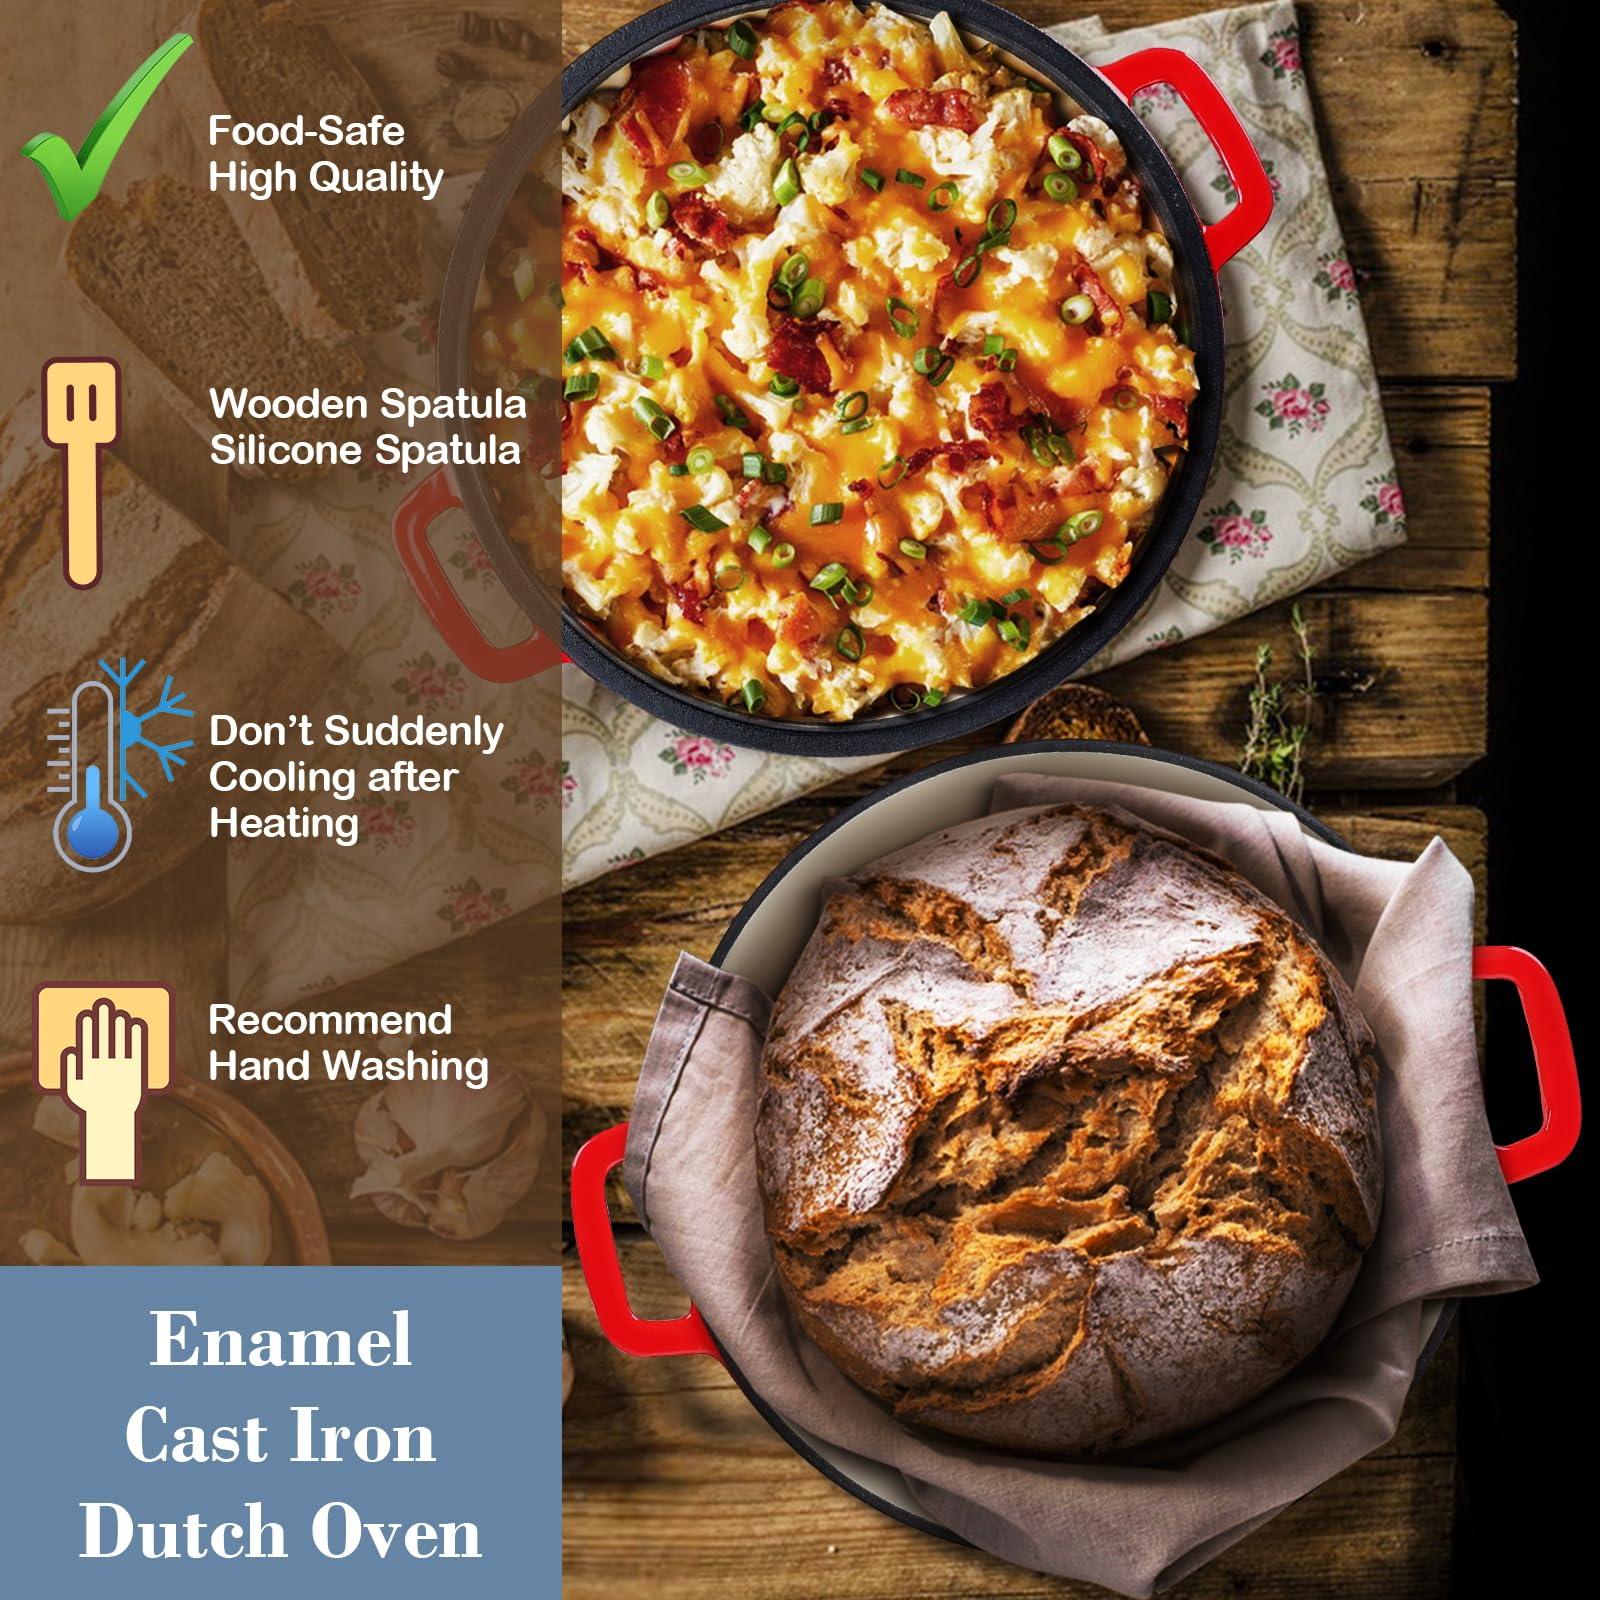 HaSteeL 2 in 1 Enameled Cast Iron Dutch Oven, 5 QT Pot & 2 Quart Skillet Lid Pan, Non-Stick Cookware Multi Cooker for Bread Baking Cooking Stewing, Suit for All Cooktops, Dual Handles & Oven Safe, Red - CookCave